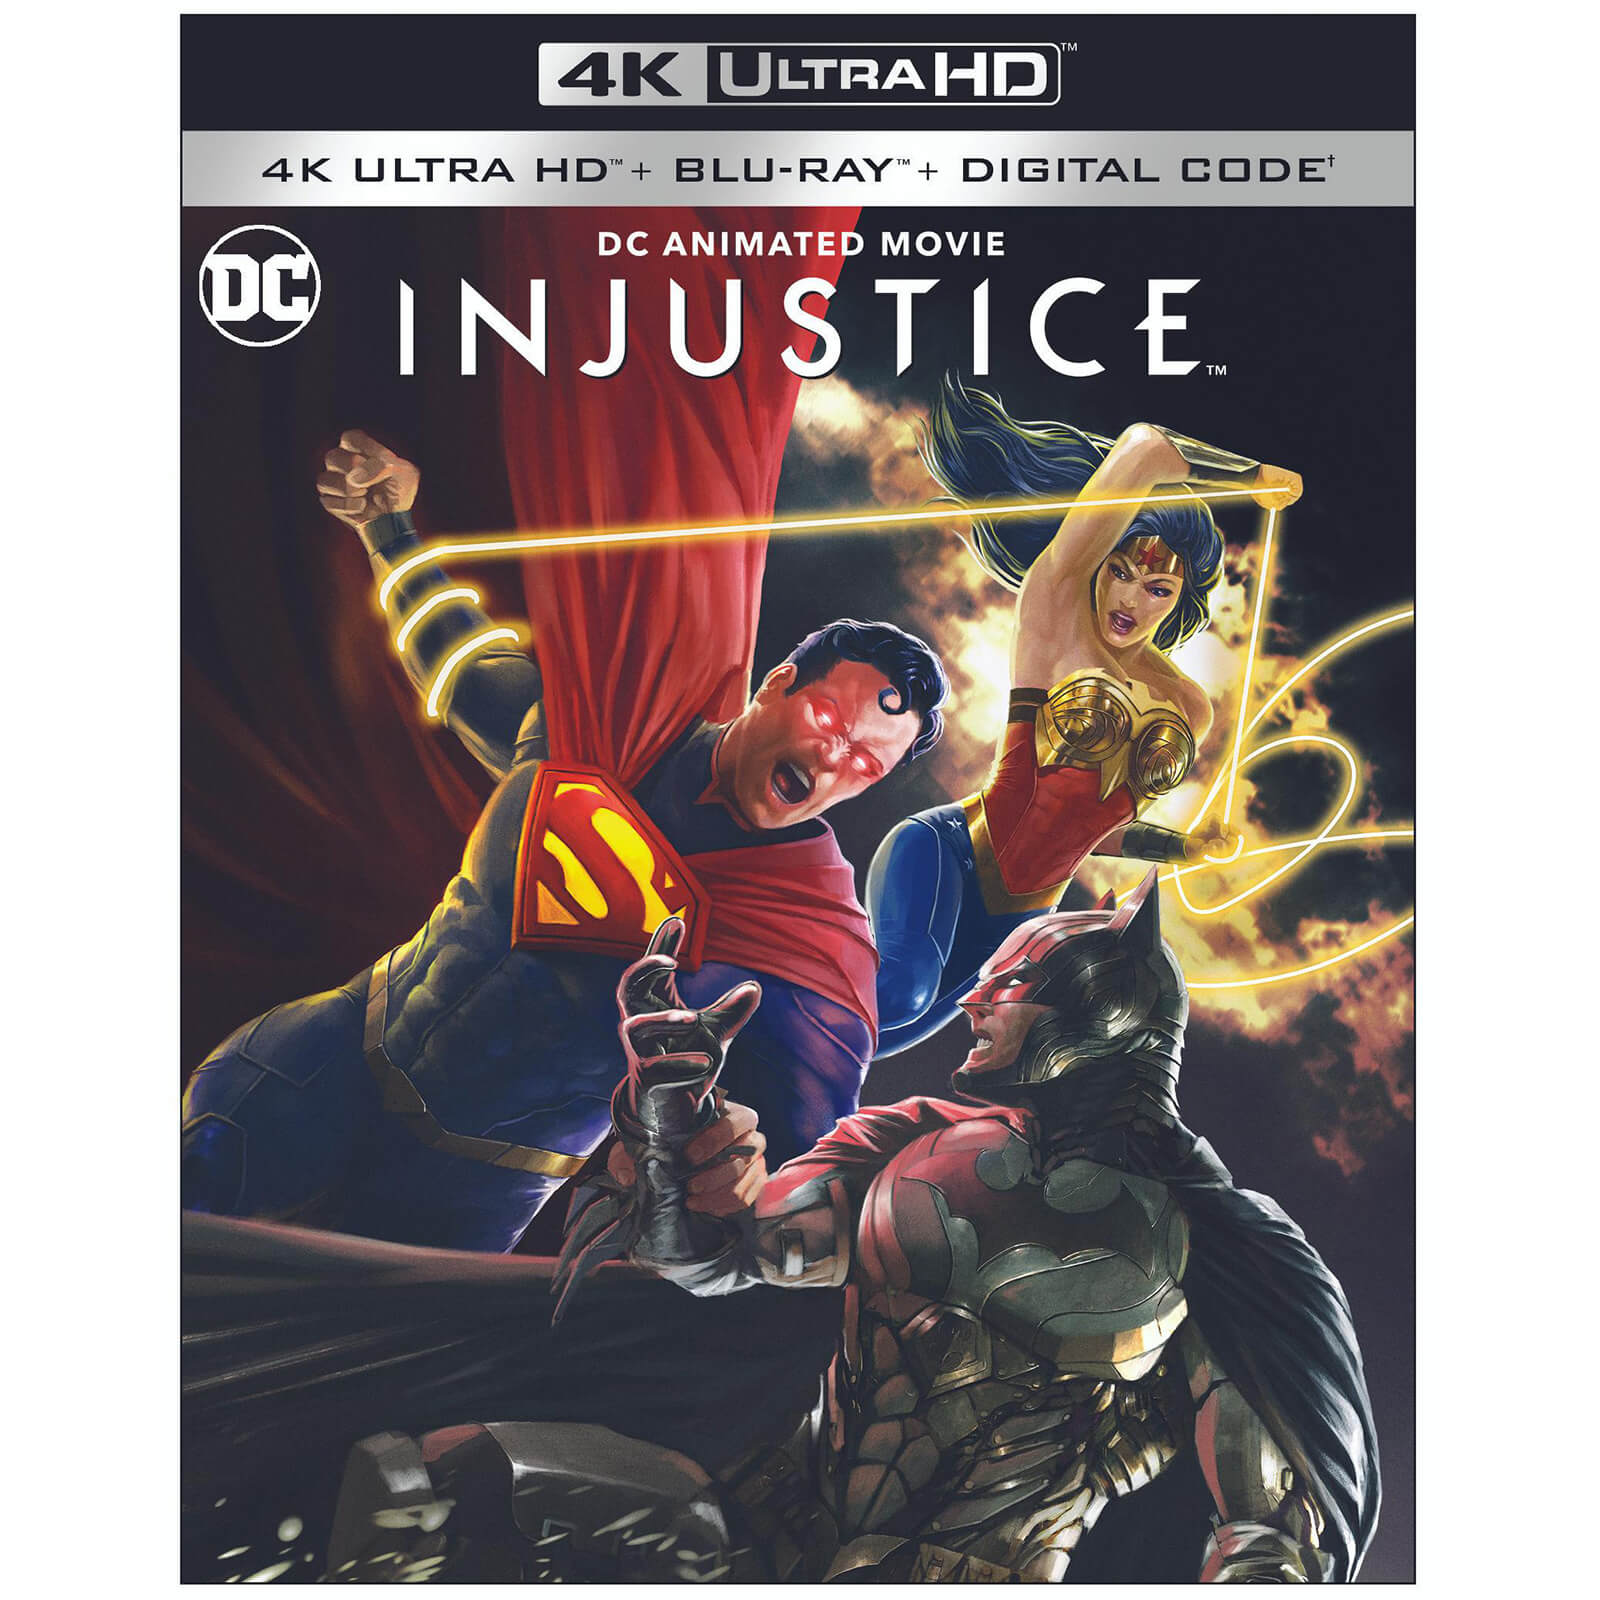 Injustice - 4K Ultra HD (Includes Blu-ray) (US Import)